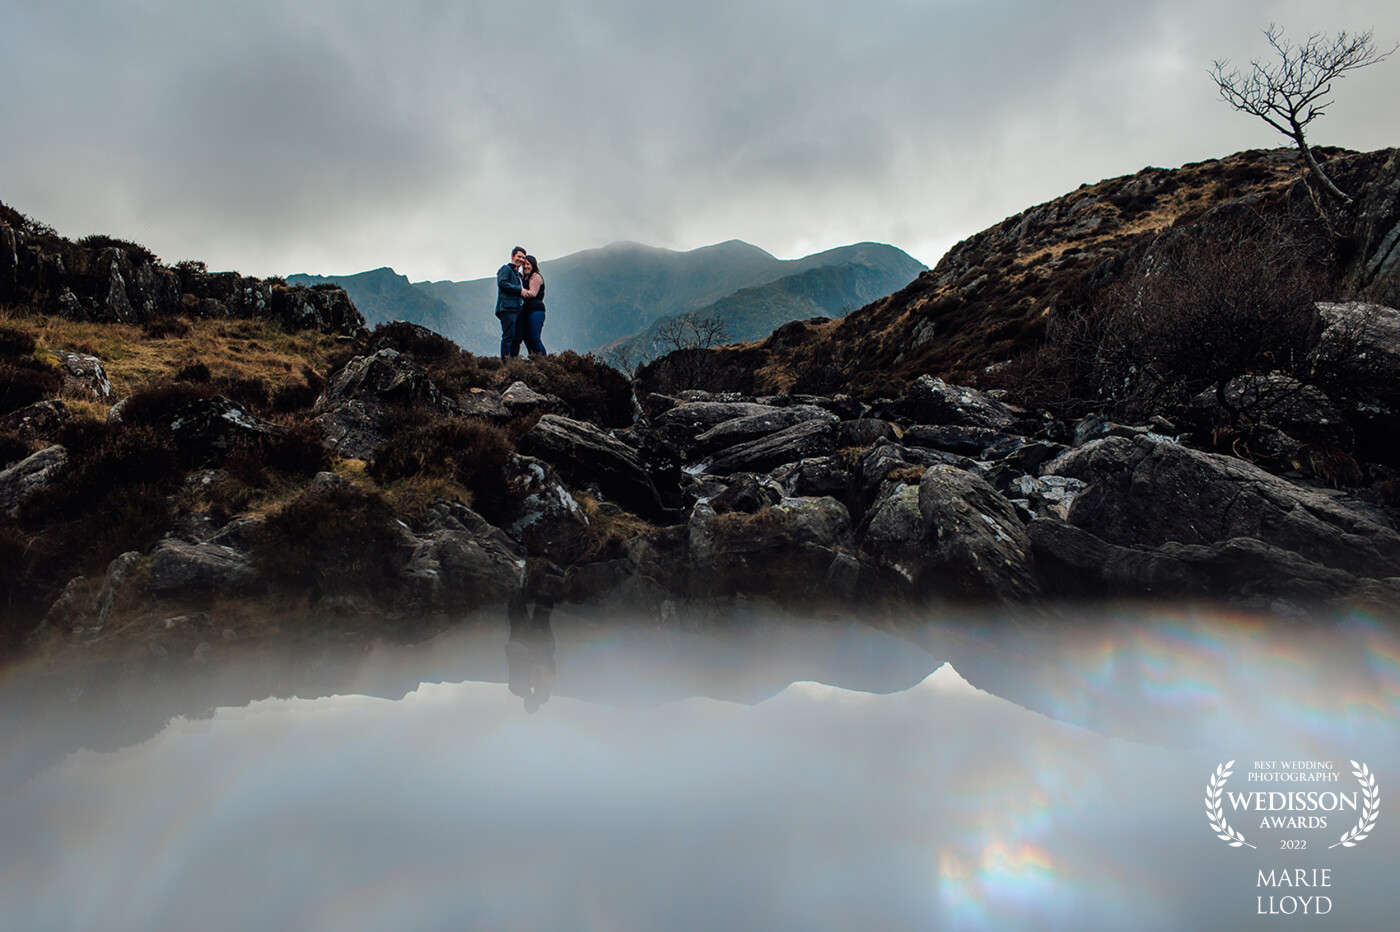 Photographed on Welsh mountains using a wide lens. A prism was used to create the reflection by holding it horizontally next to the lens.